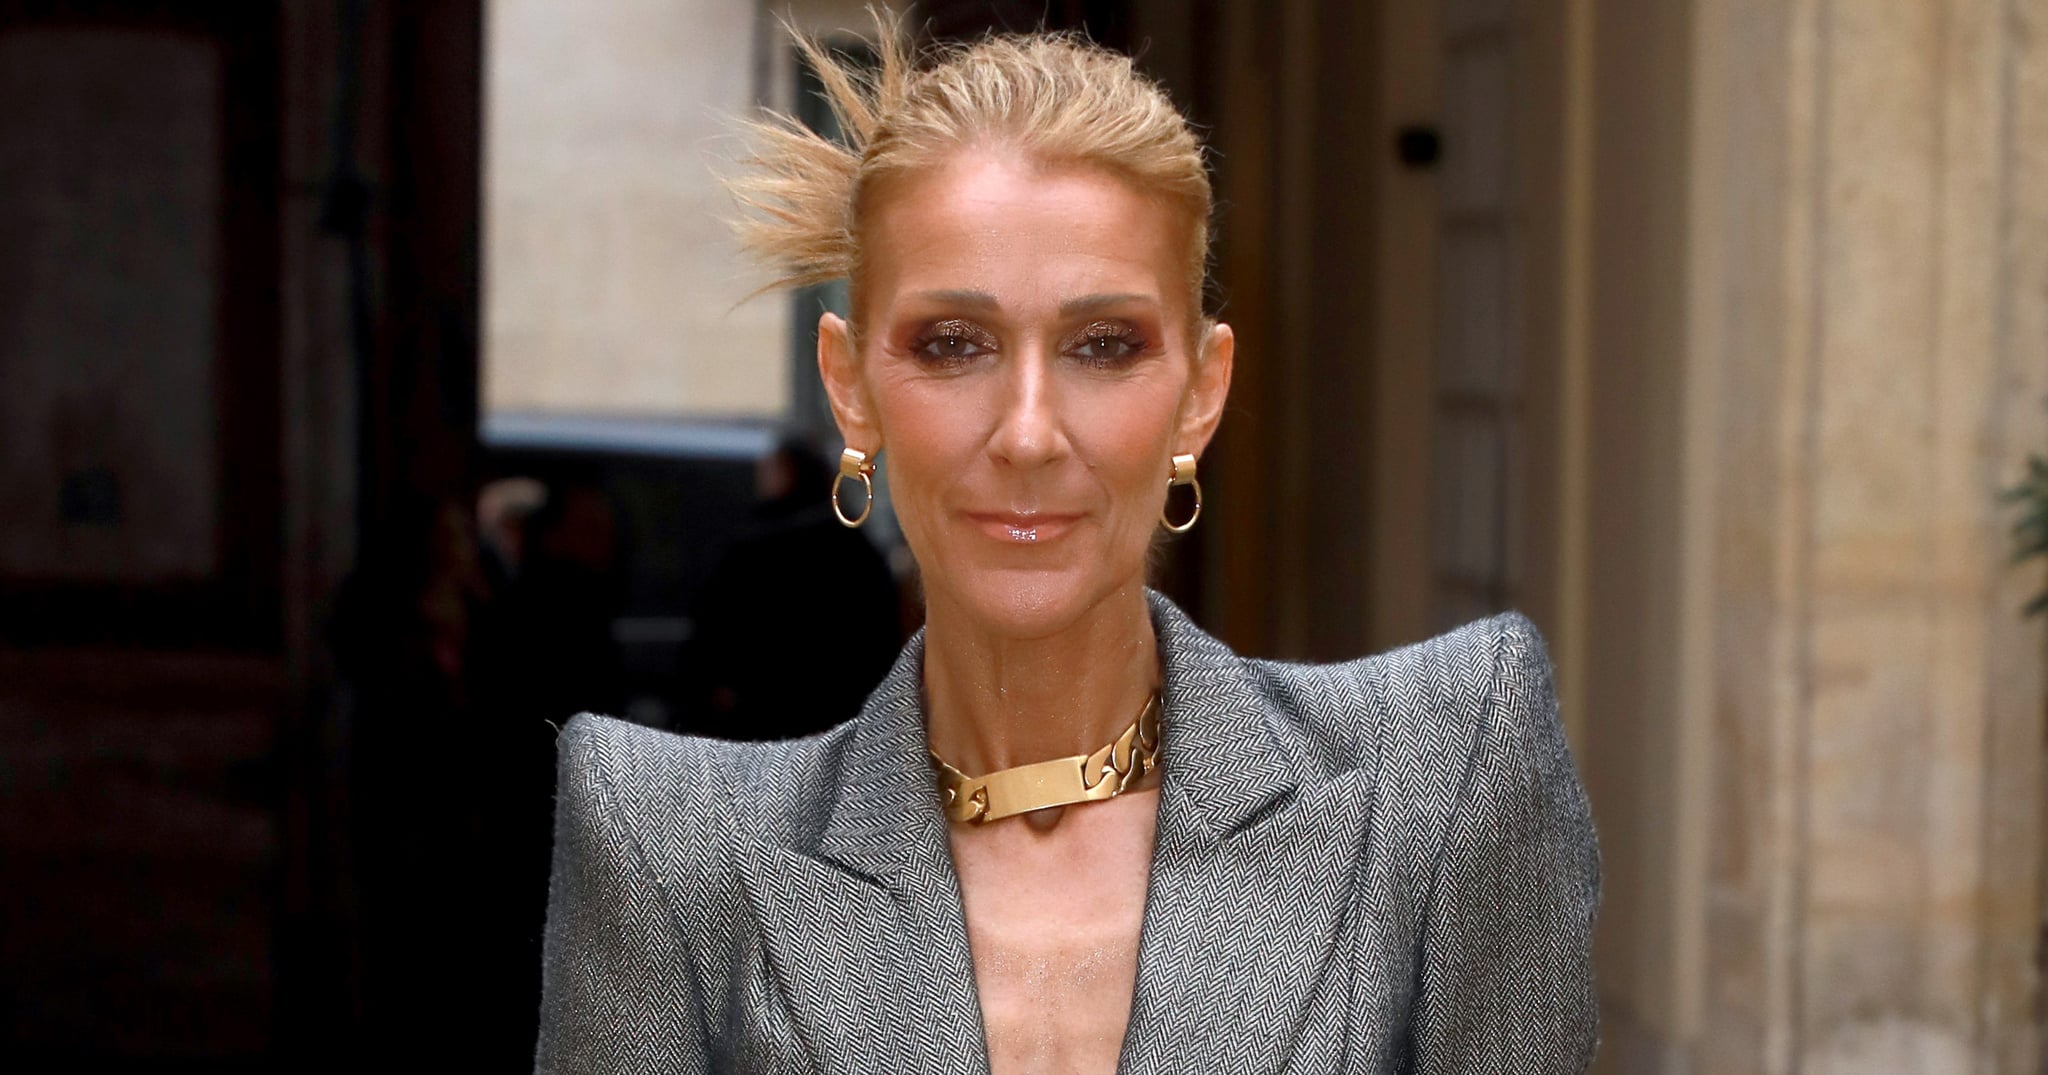 Celine Dion Sets the Record Straight on Her Relationship Status: 